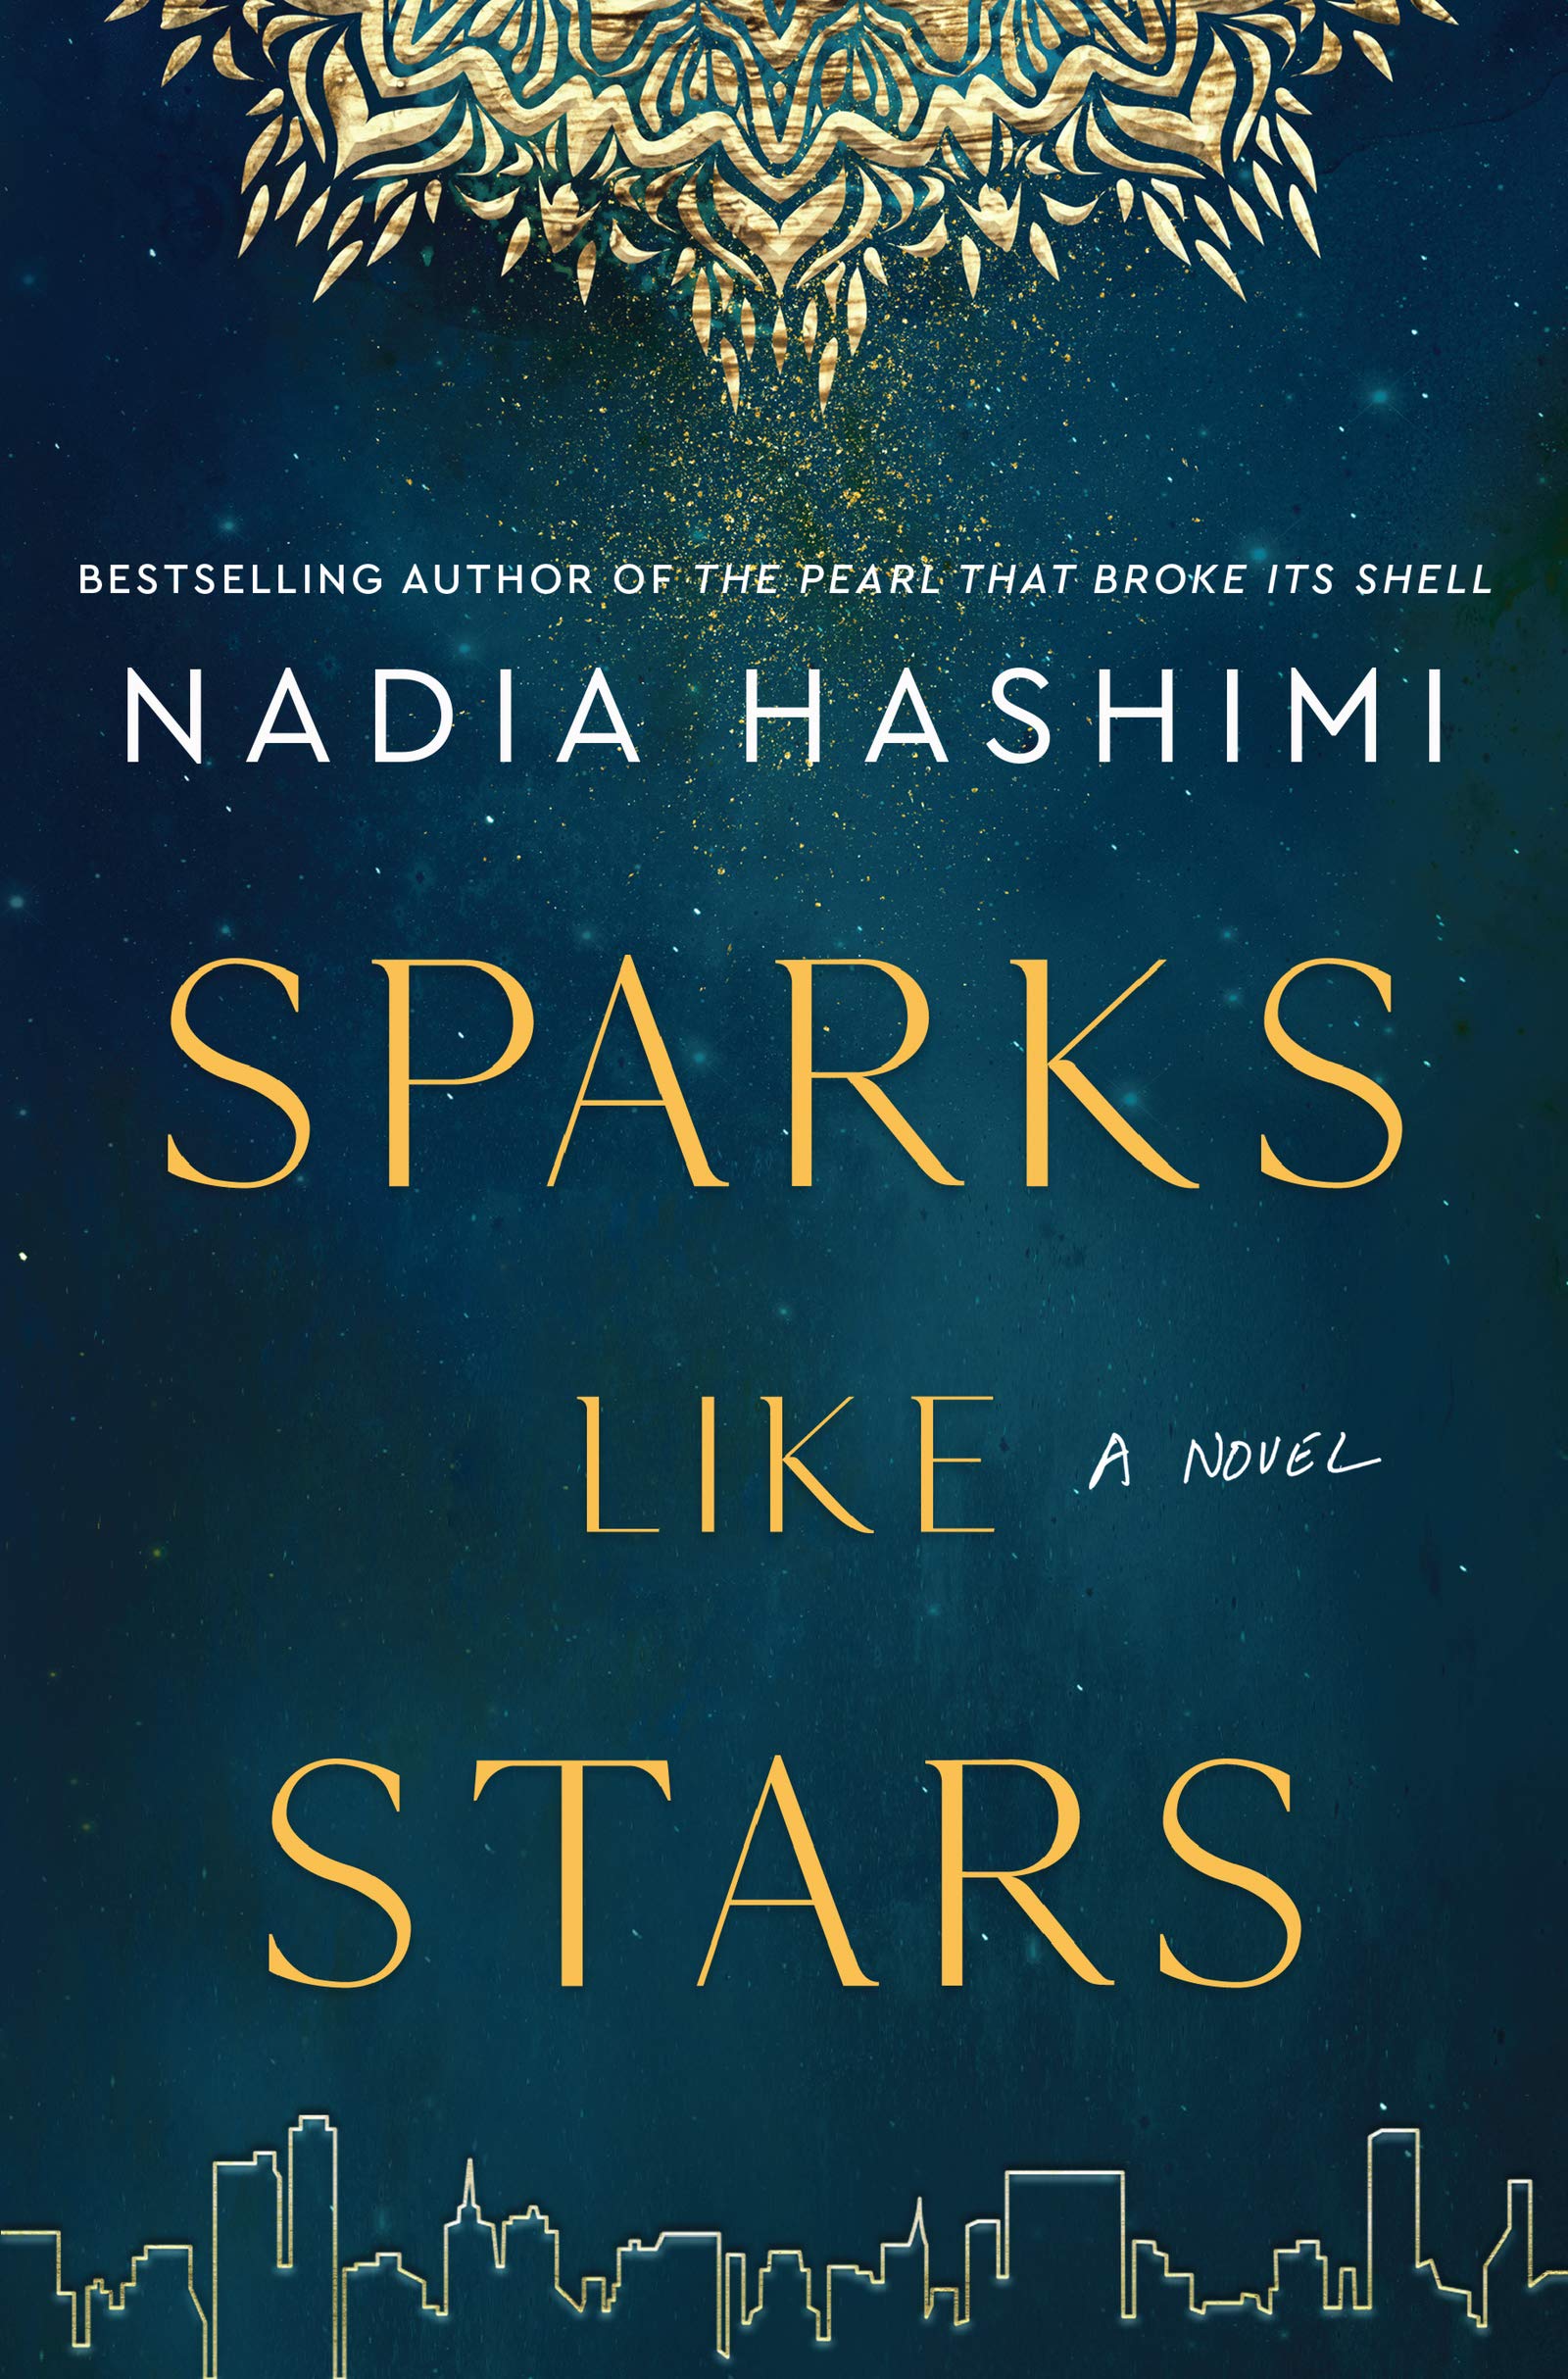 Sparks Like Stars by Nadia Hashimi book cover